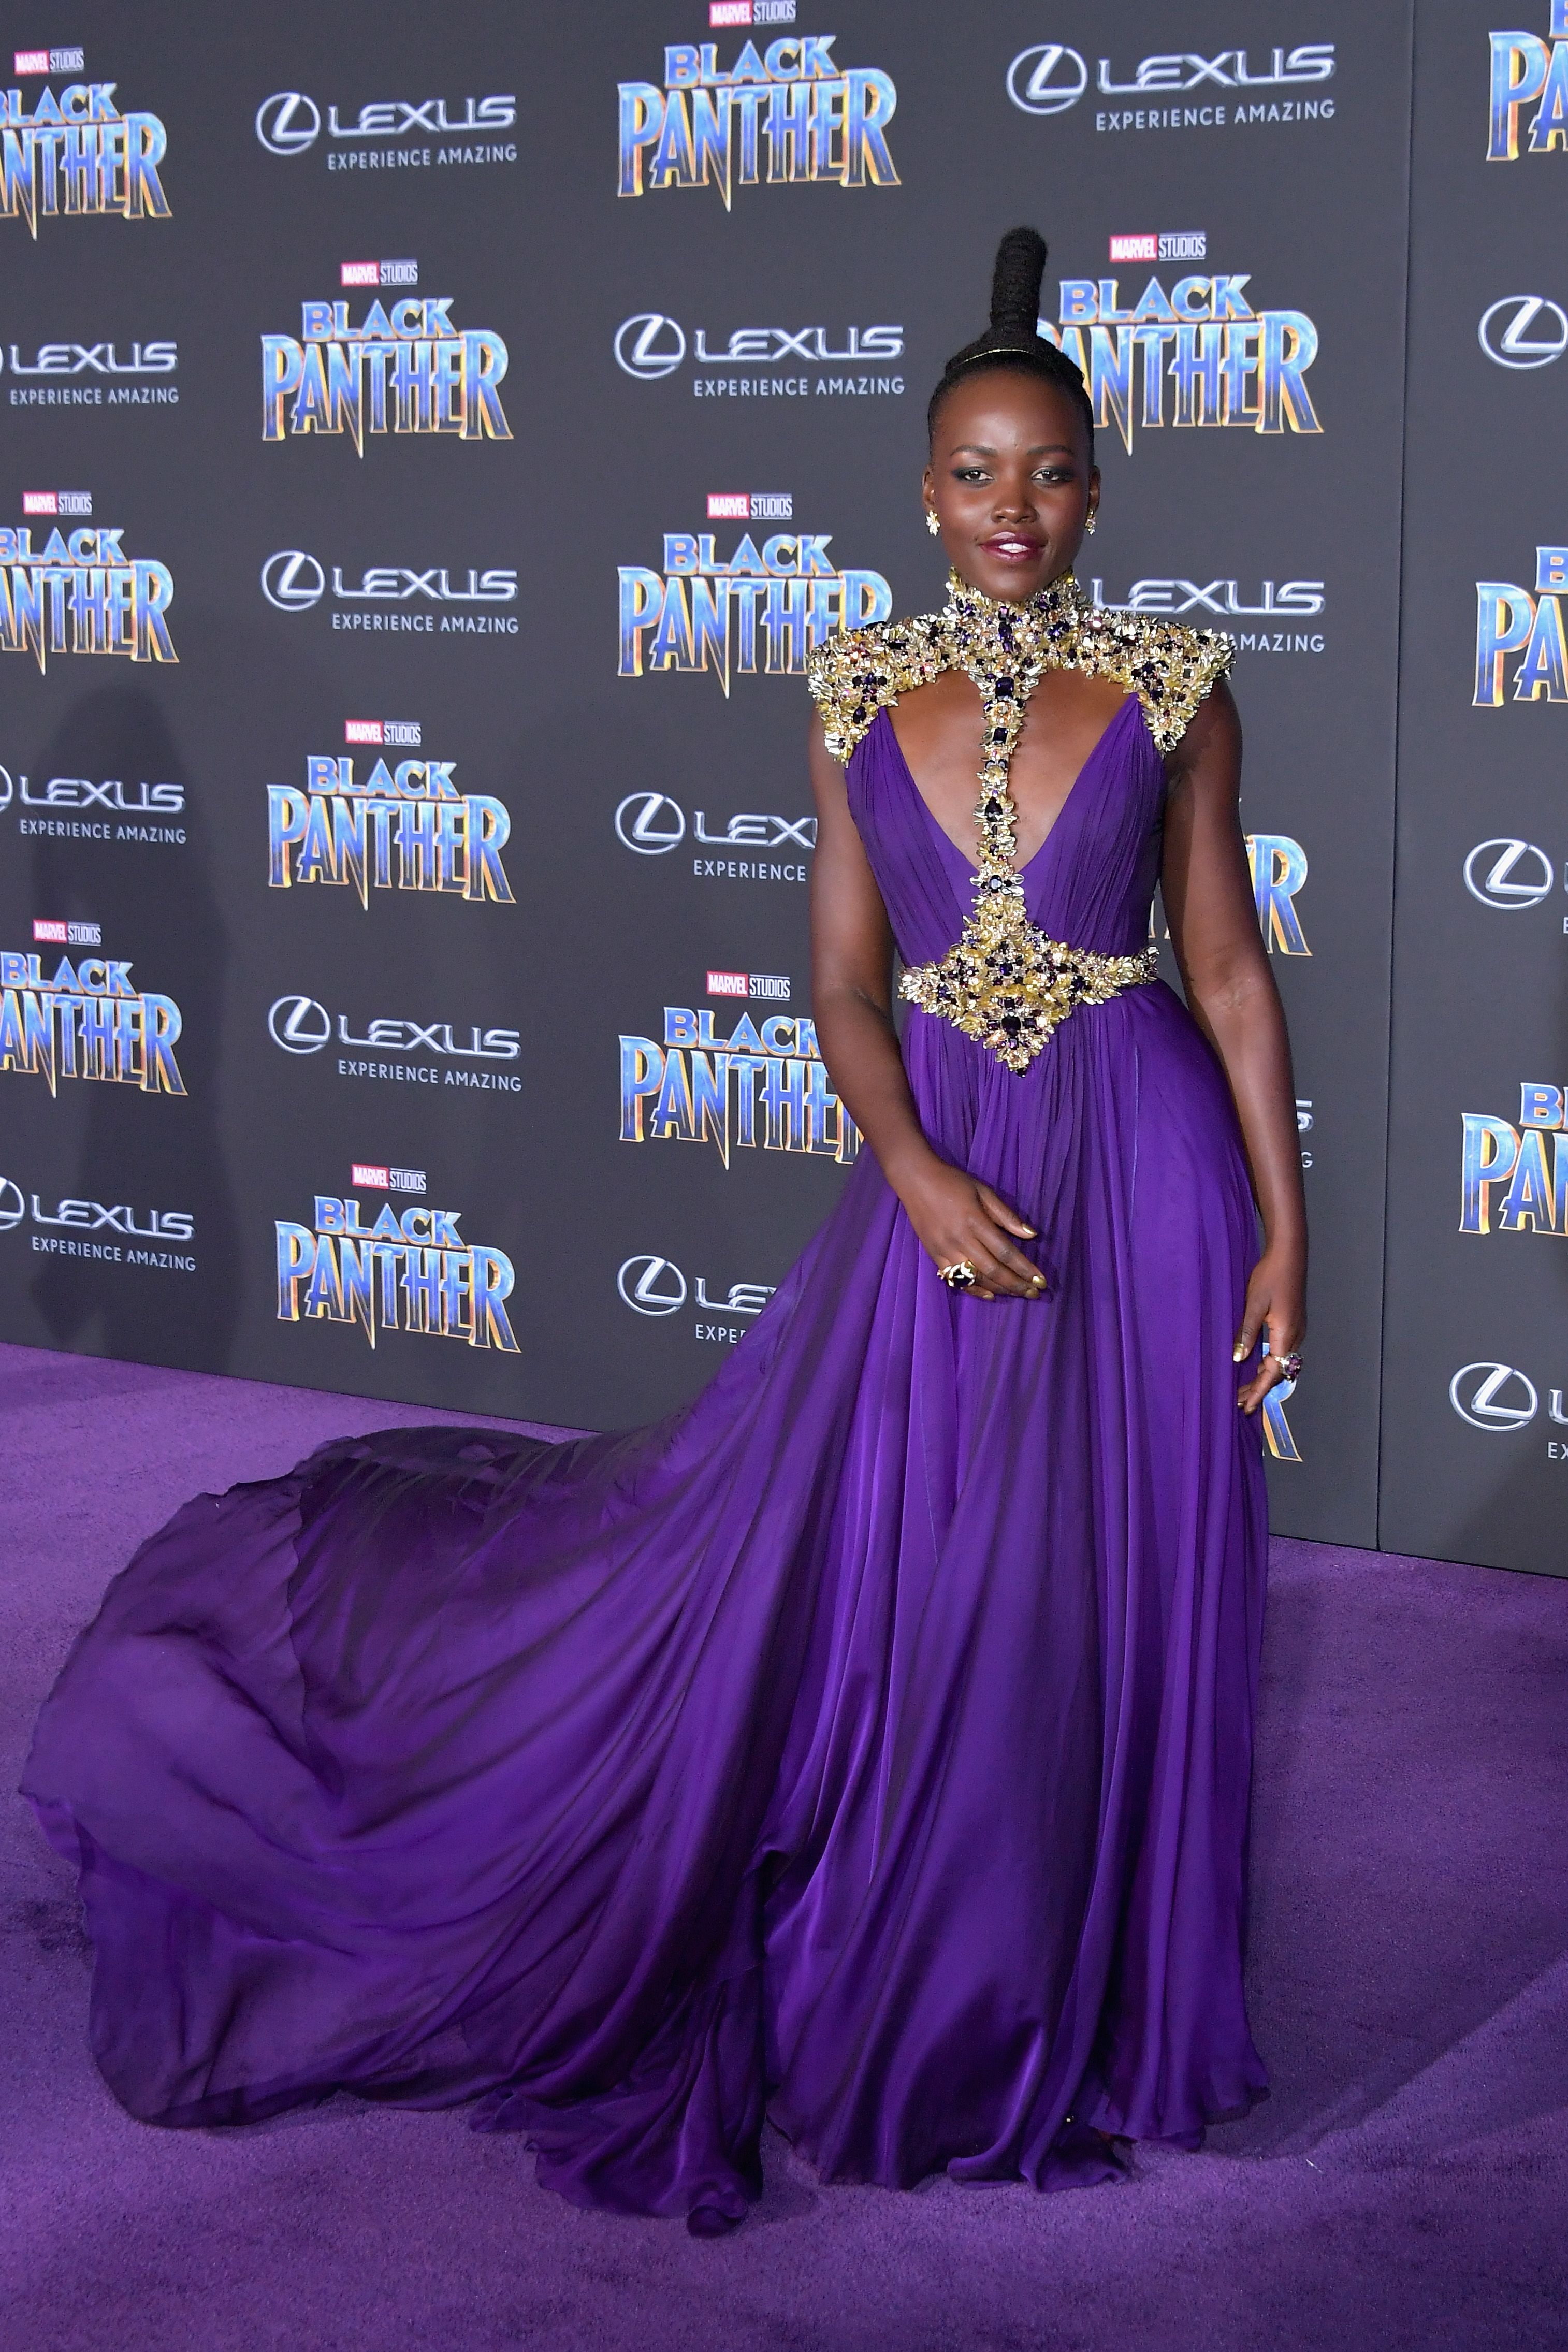 Lupita Nyong'o at the Black Panther premiere with warrior inspired dress. :  r/marvelstudios